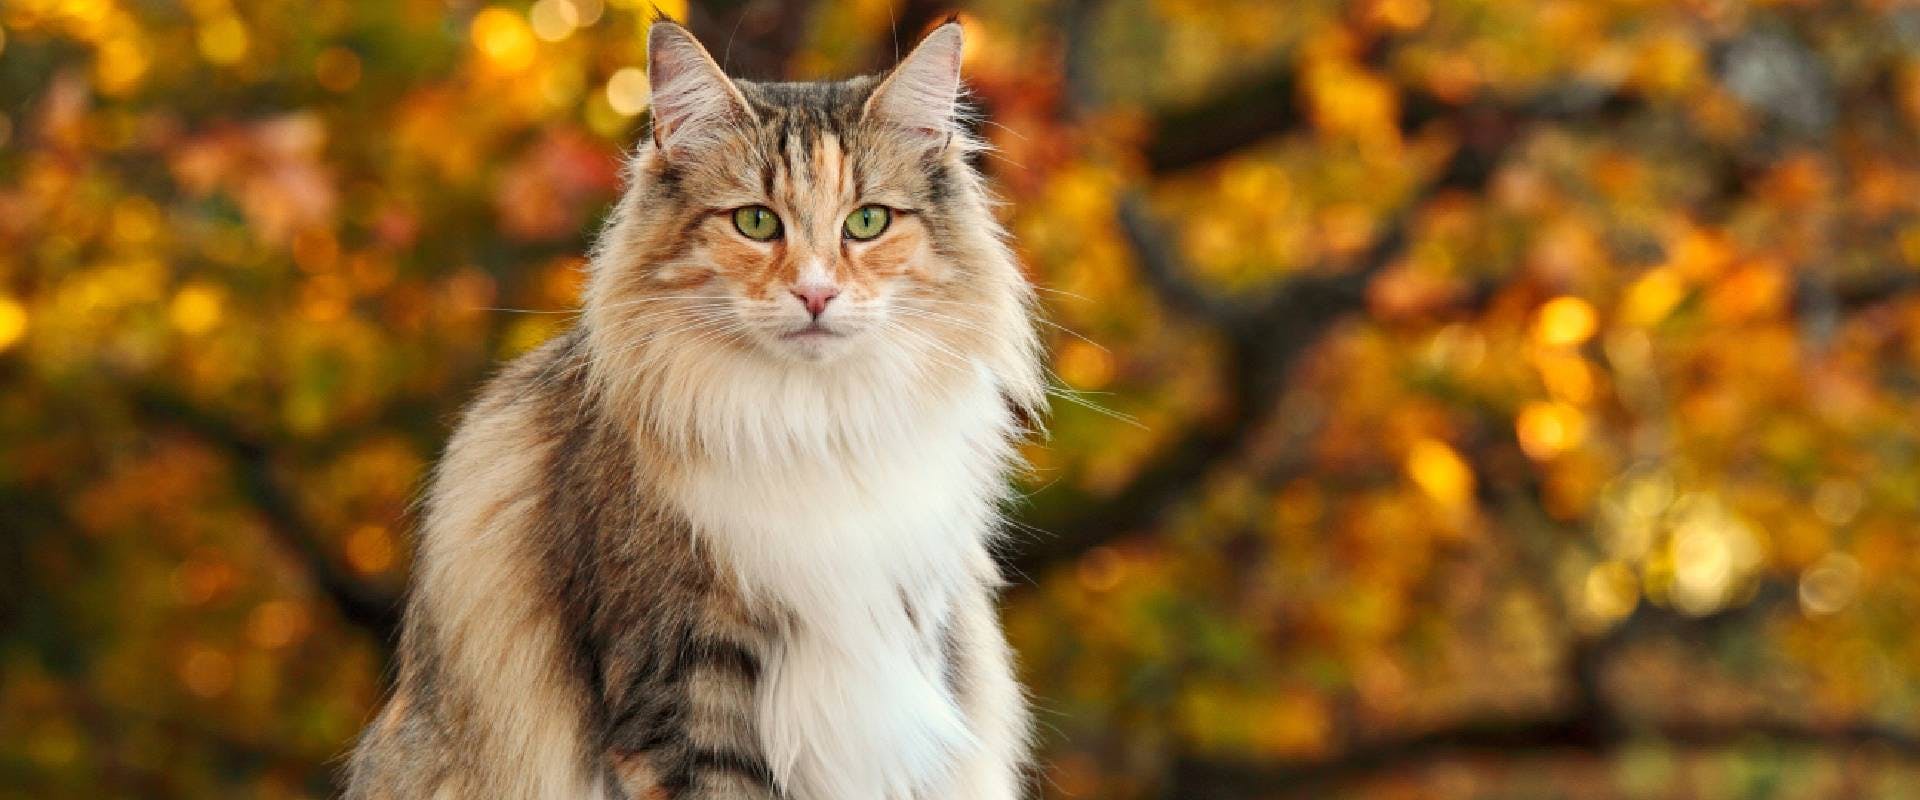 Majestic-looking cat in front of autumnal trees